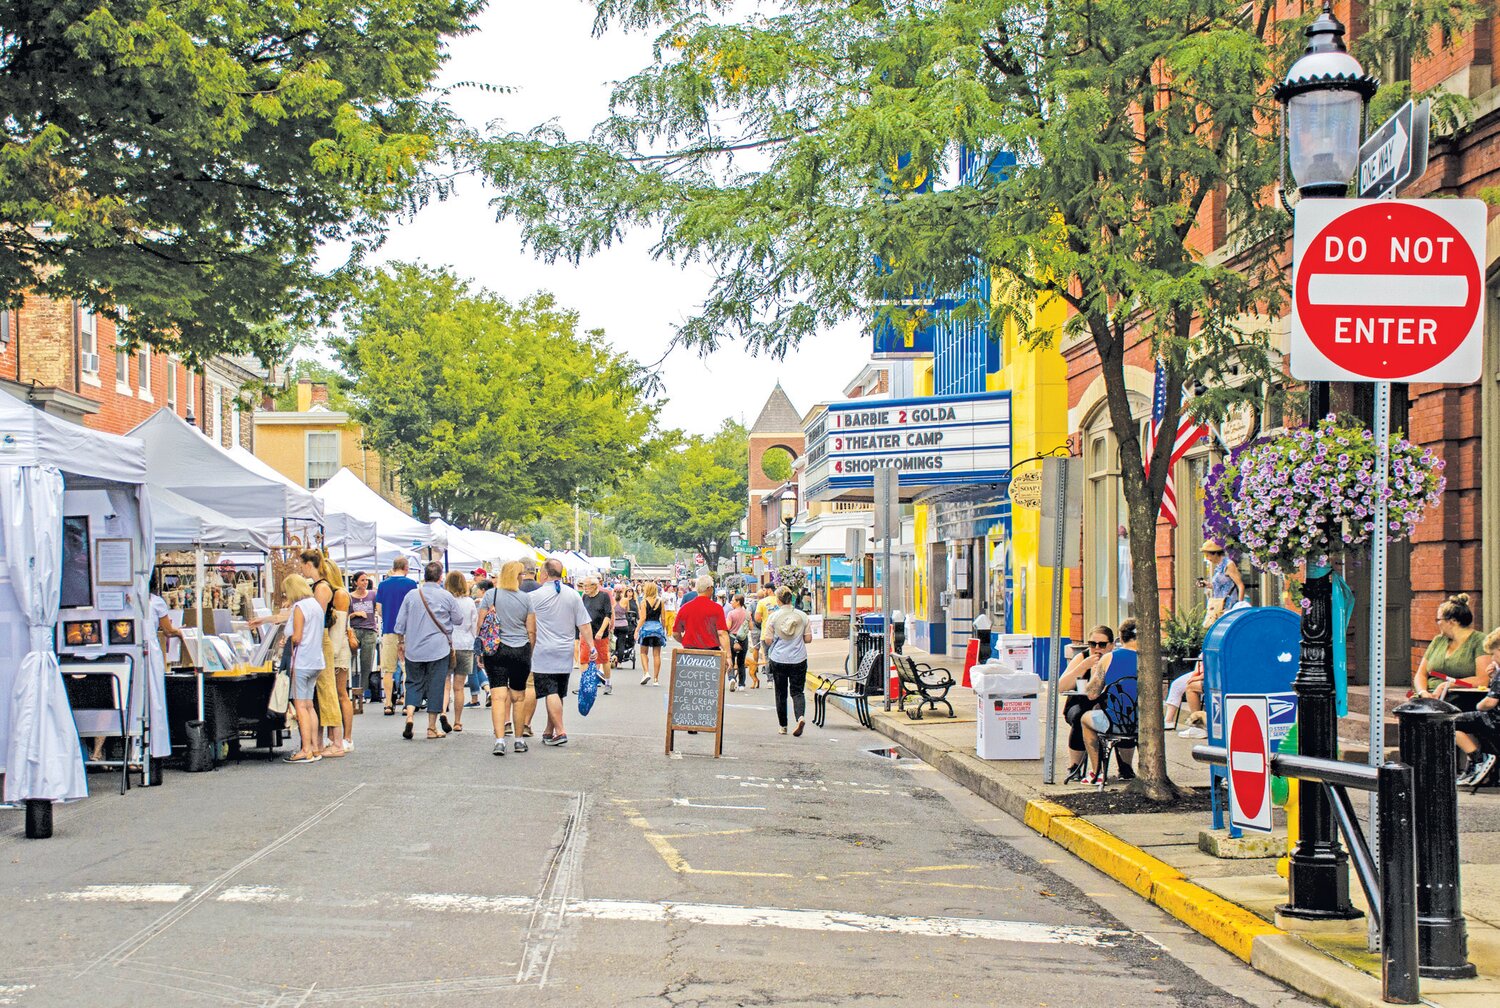 Tents line East State Street in Doylestown Sept. 9 during the arts festival.